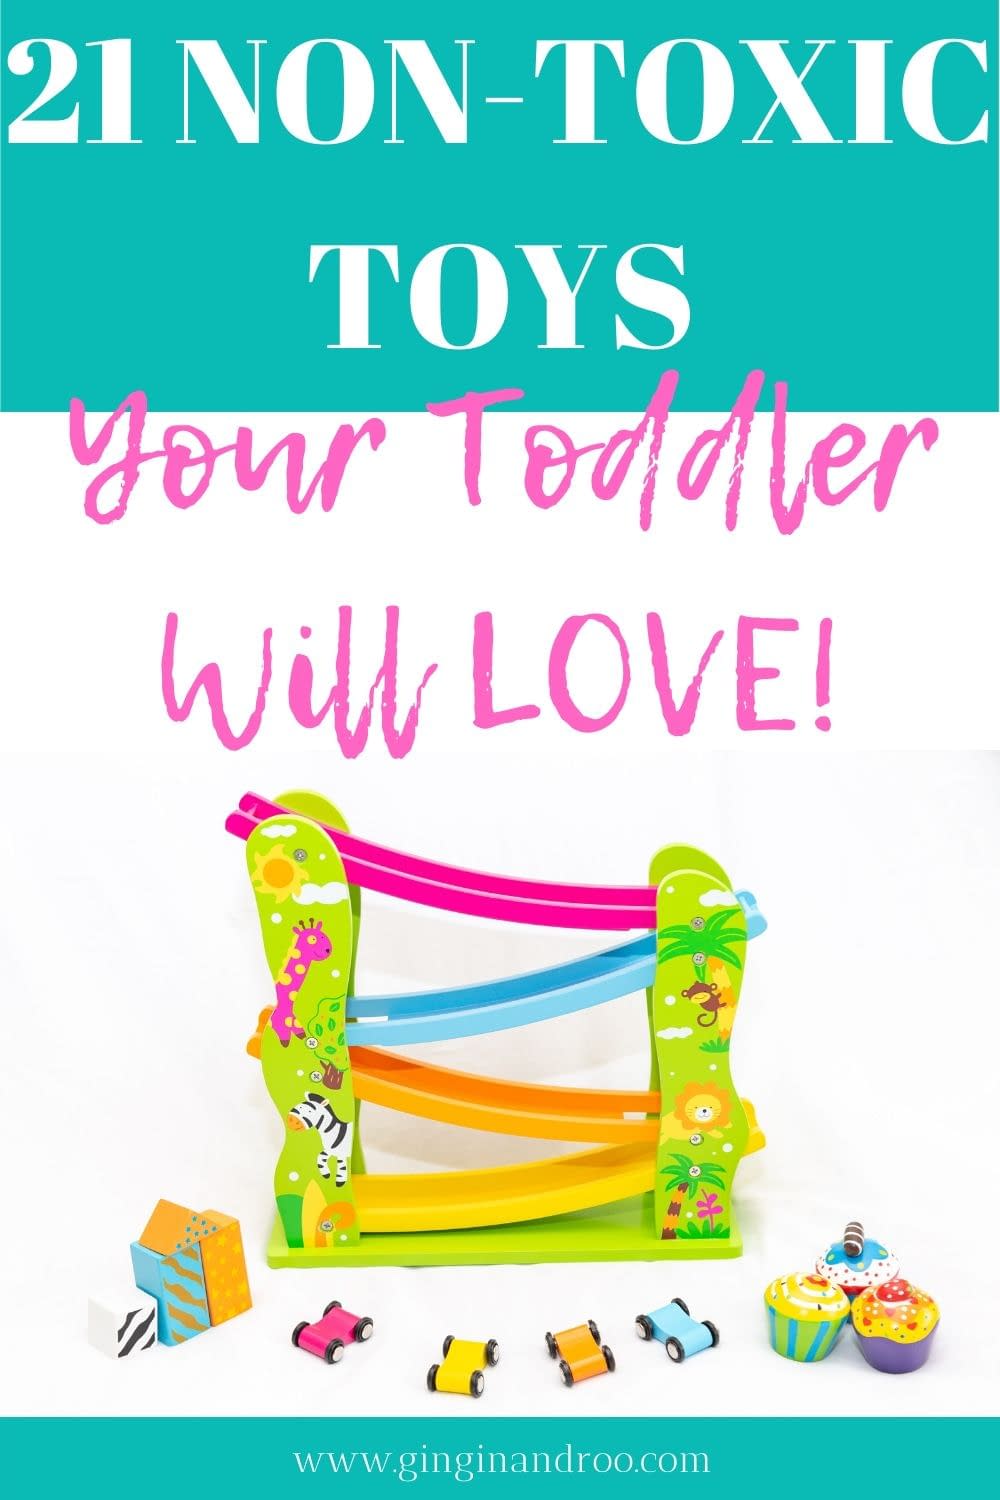 21 Non Toxic Toys For Toddlers. The BEST toxic free toys your toddler will LOVE.